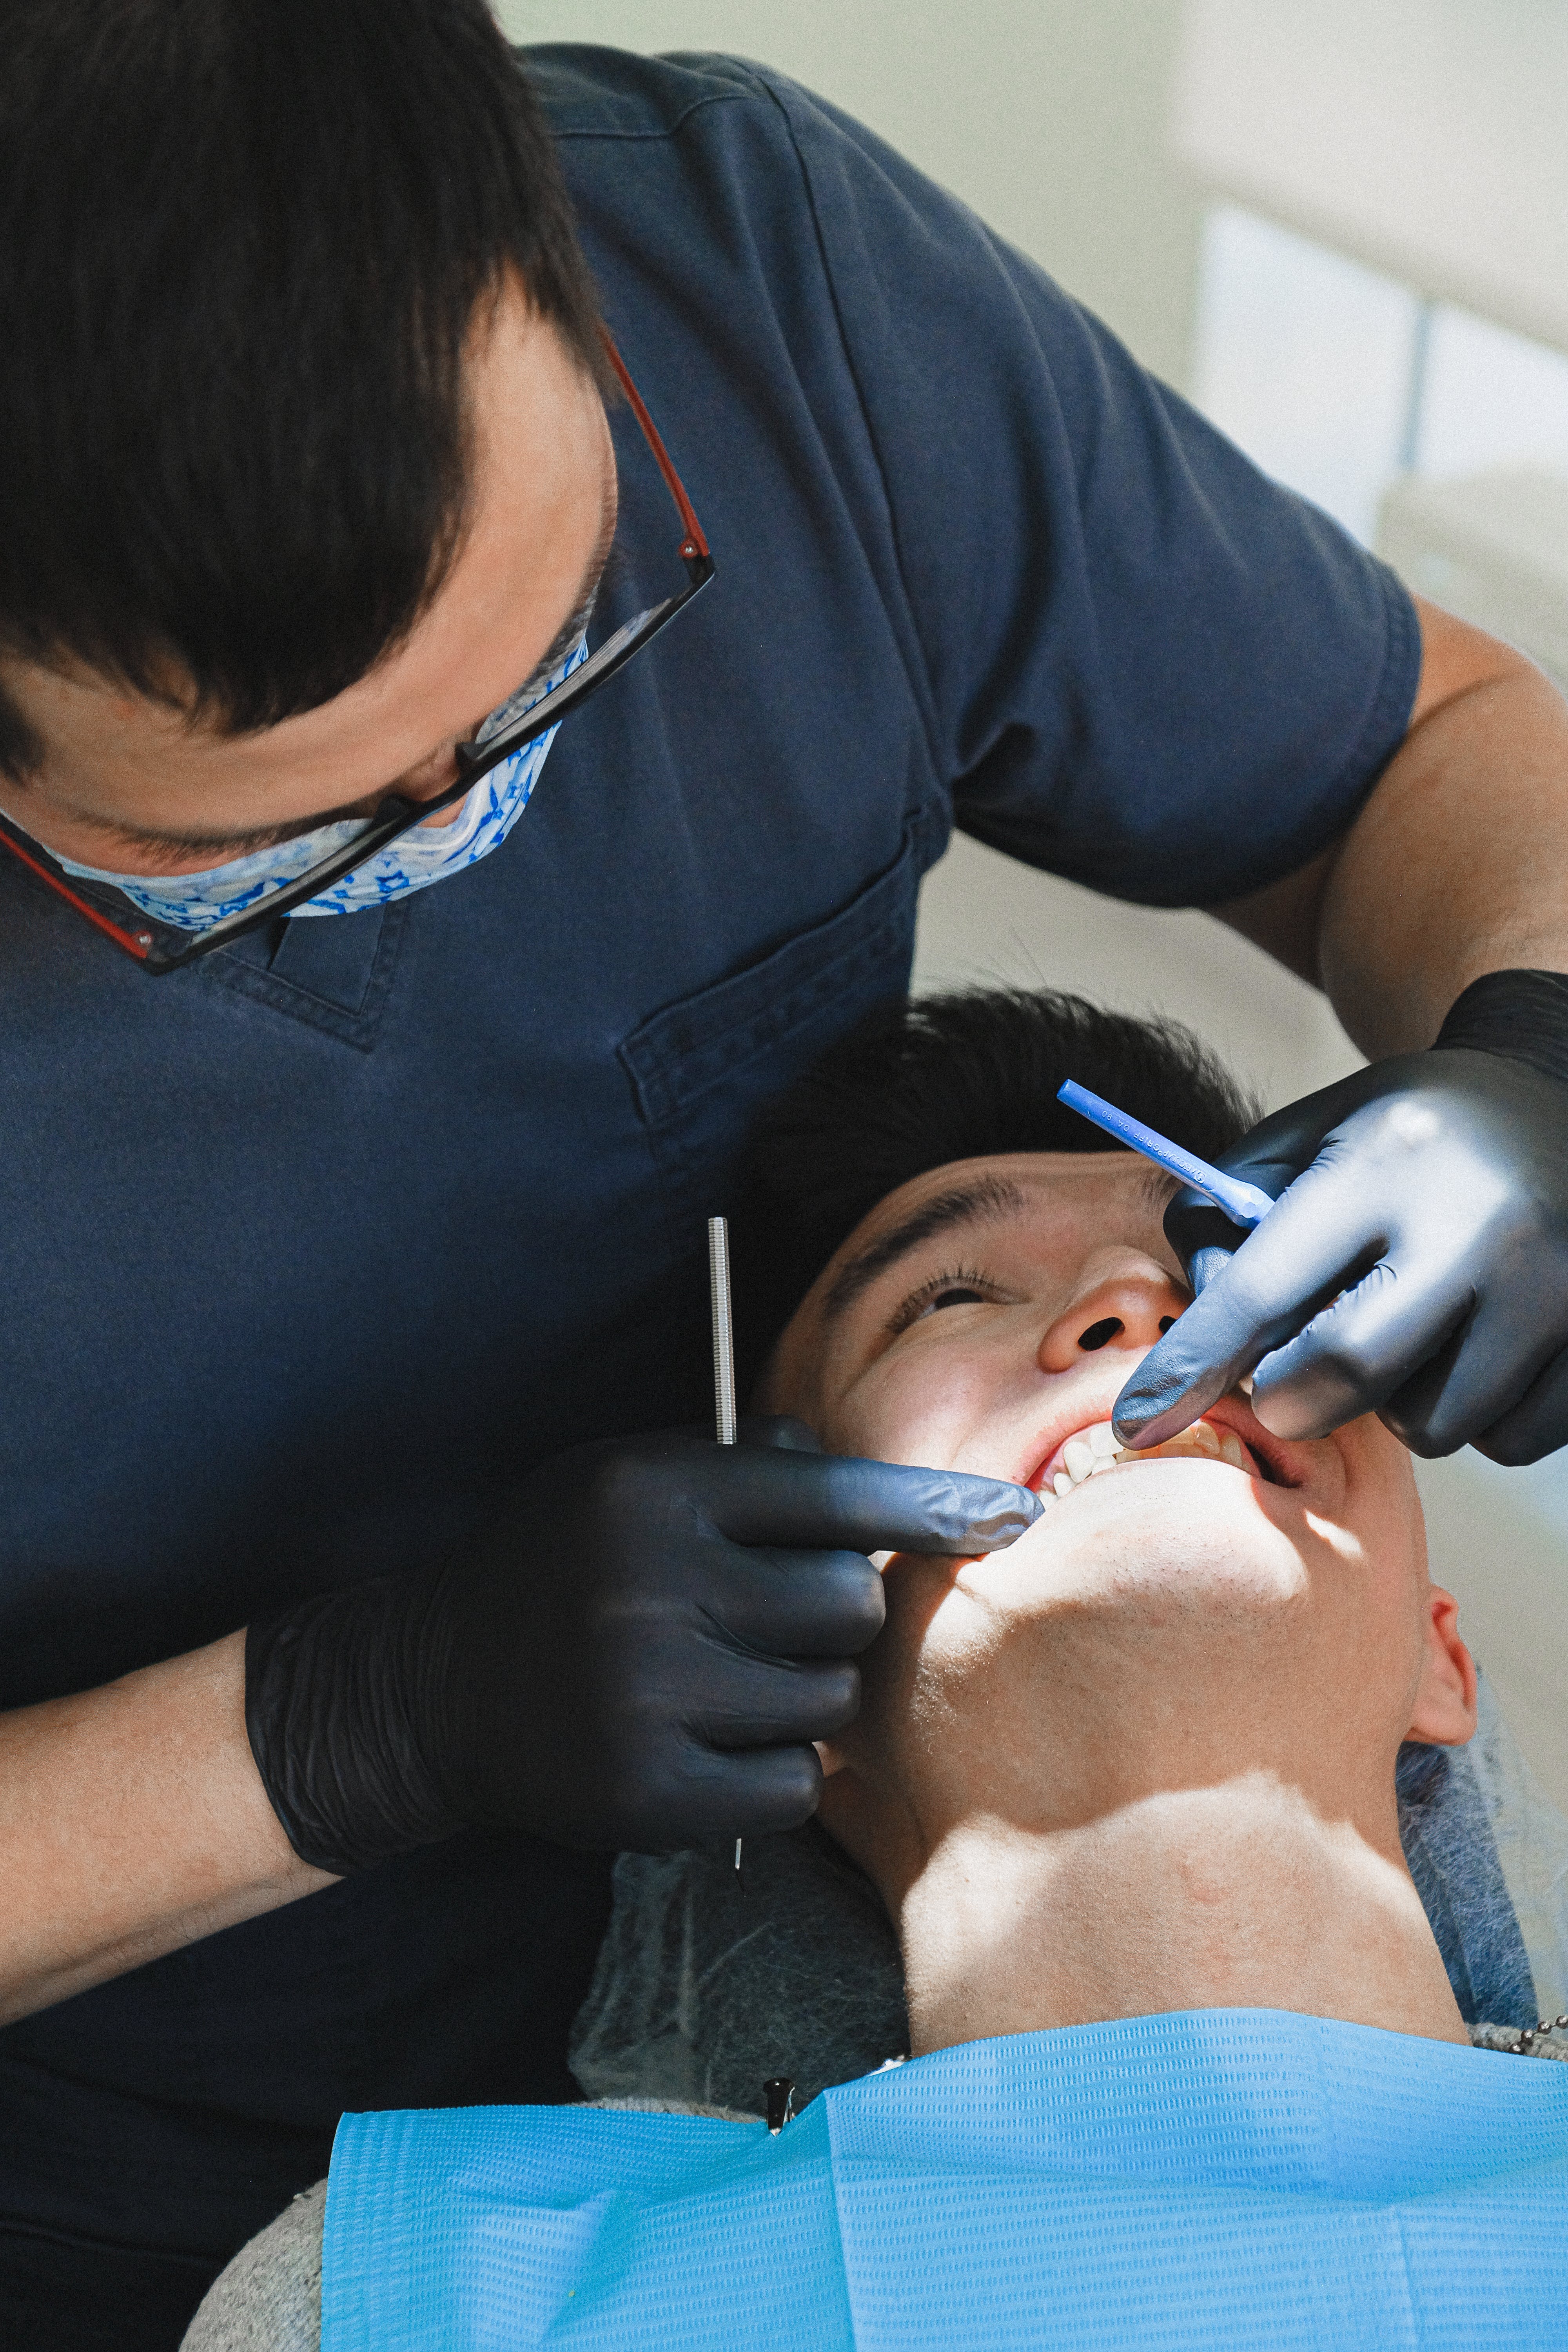 A male dentist examining a patient. | Source: Pexels